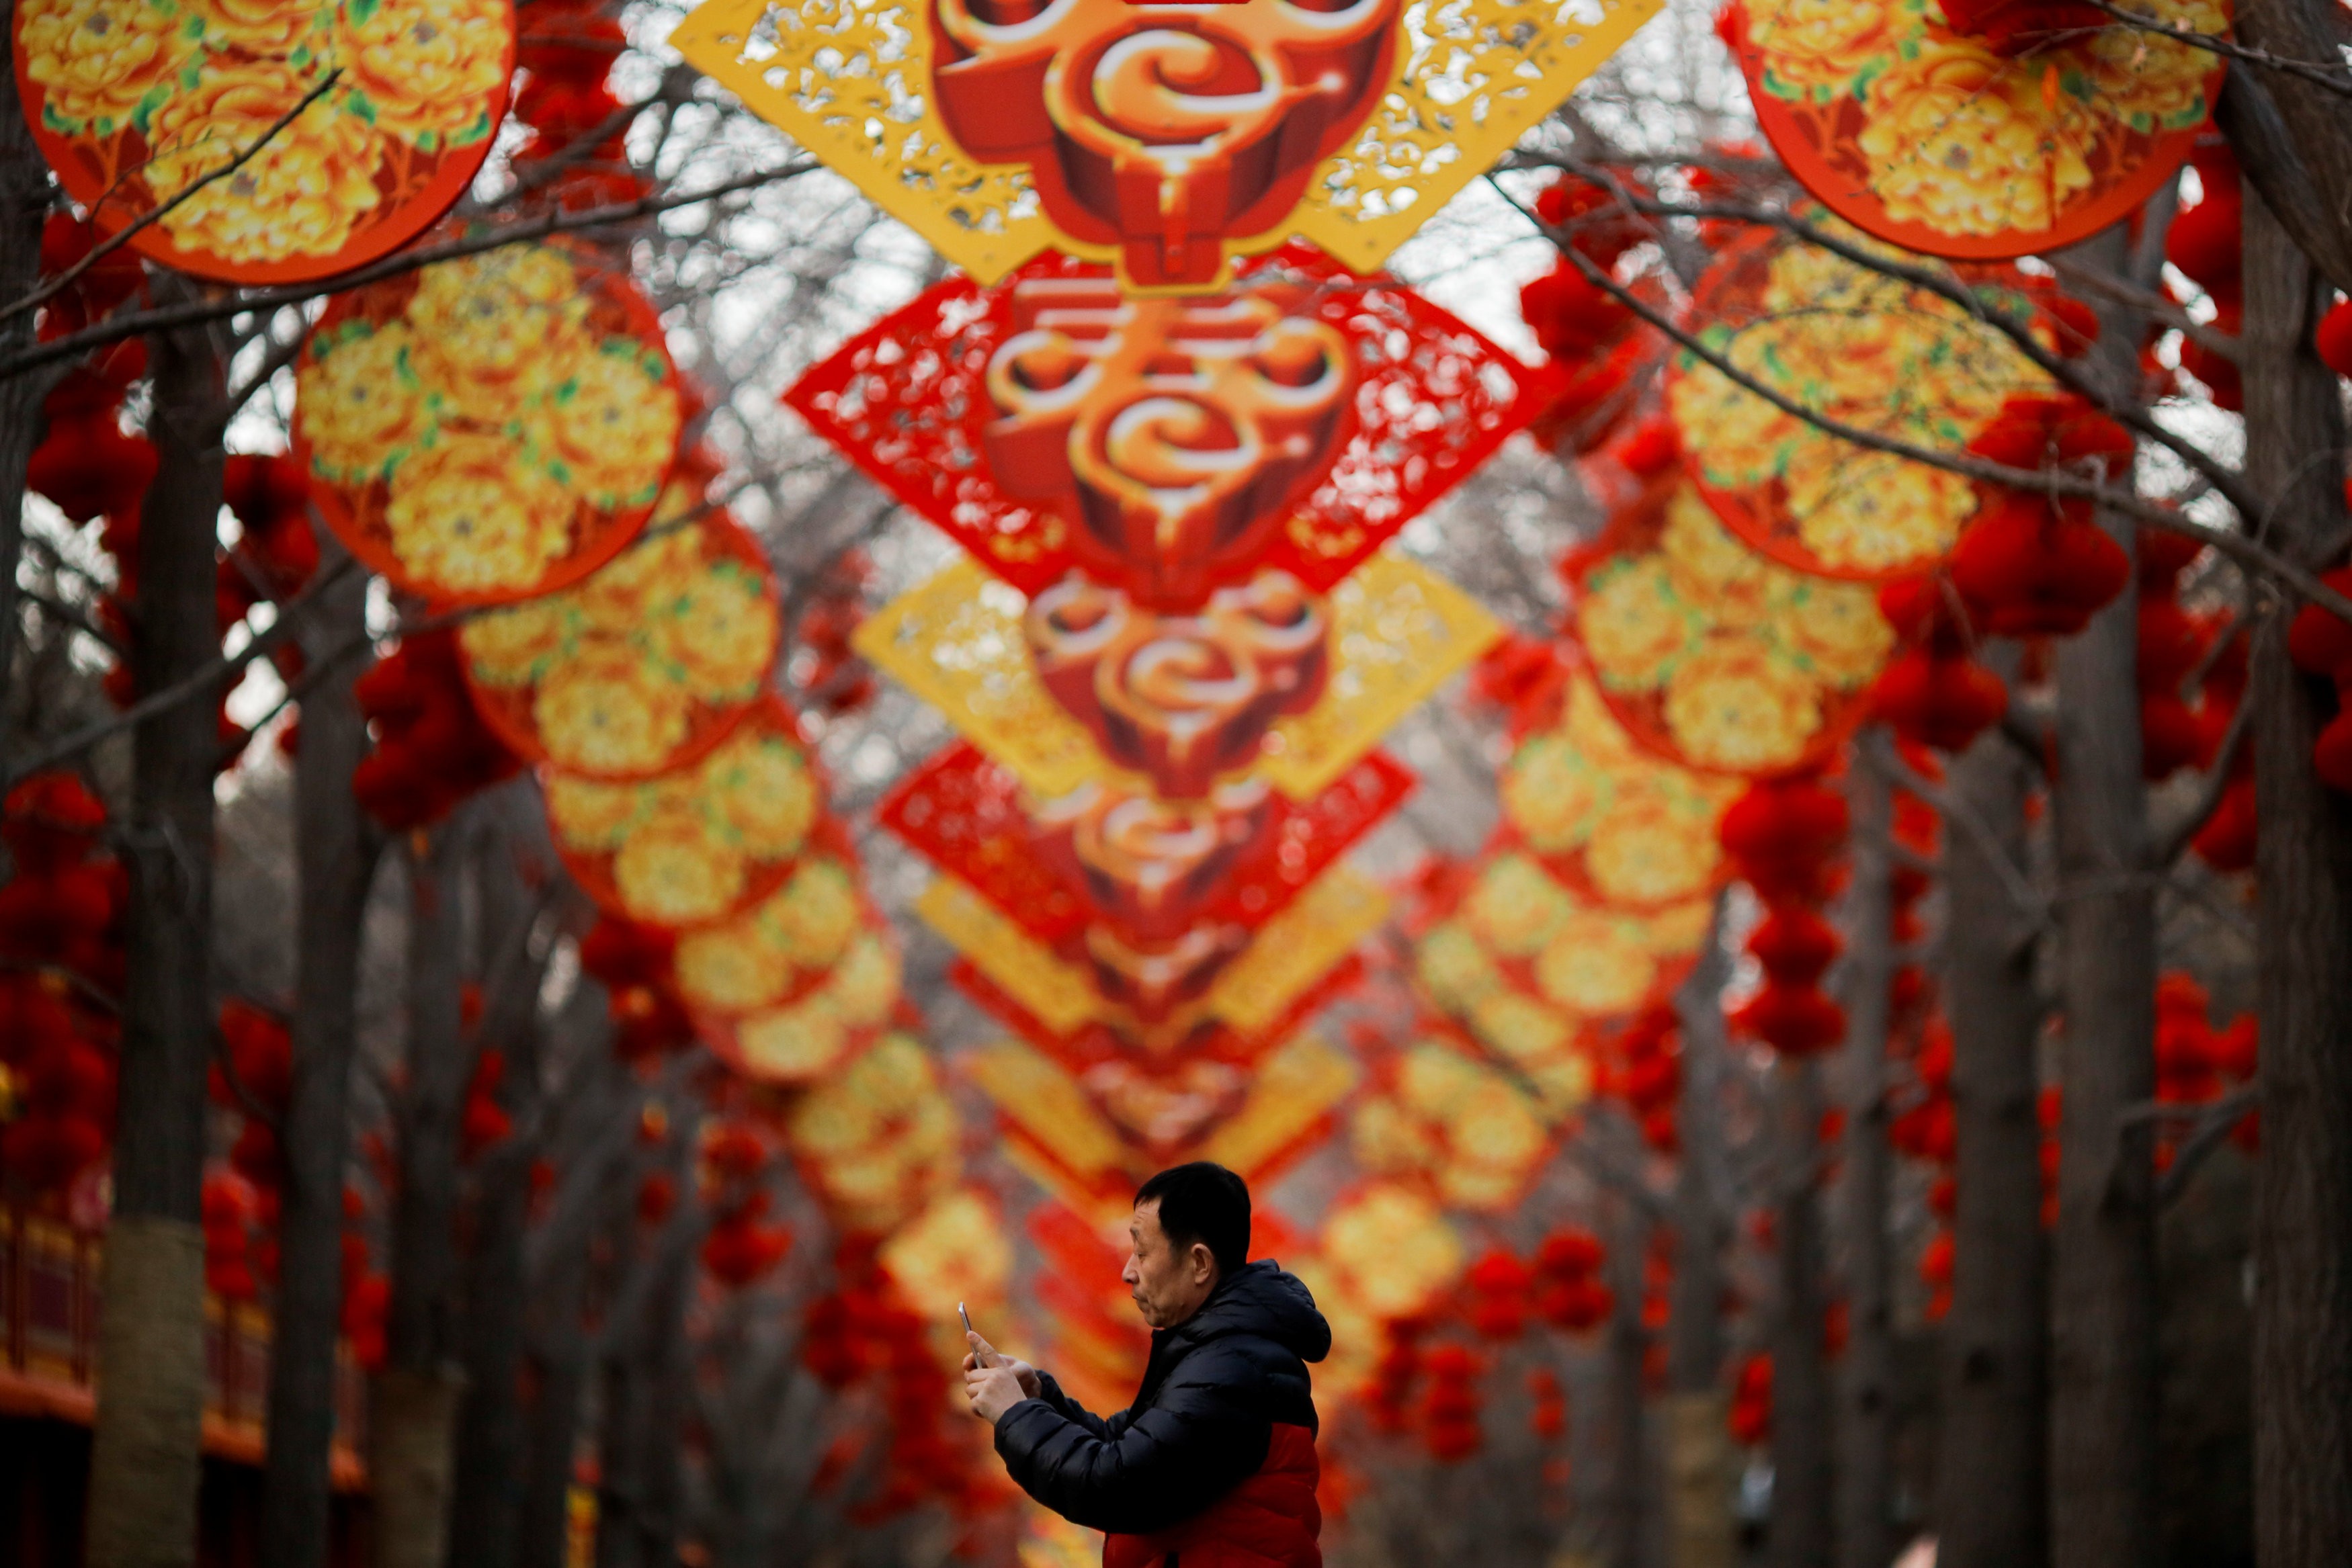 The Lunar New Year holiday, or Spring Festival, is China’s most important holiday, and data from China’s social media giants highlights the habits of the nation at rest 